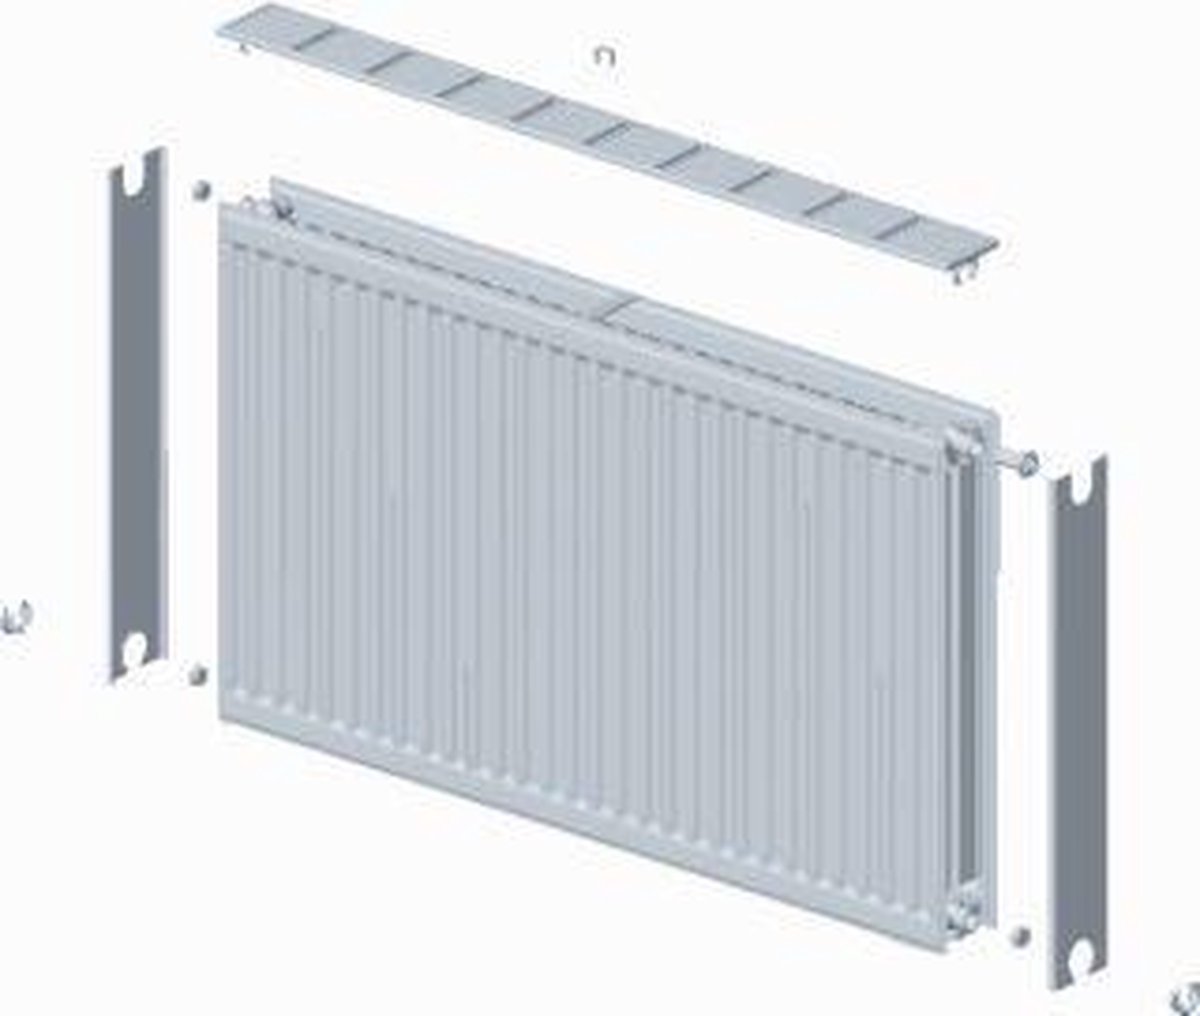 Stelrad paneelradiator Novello, staal, wit, (hxlxd) 600x1600x100mm, 22